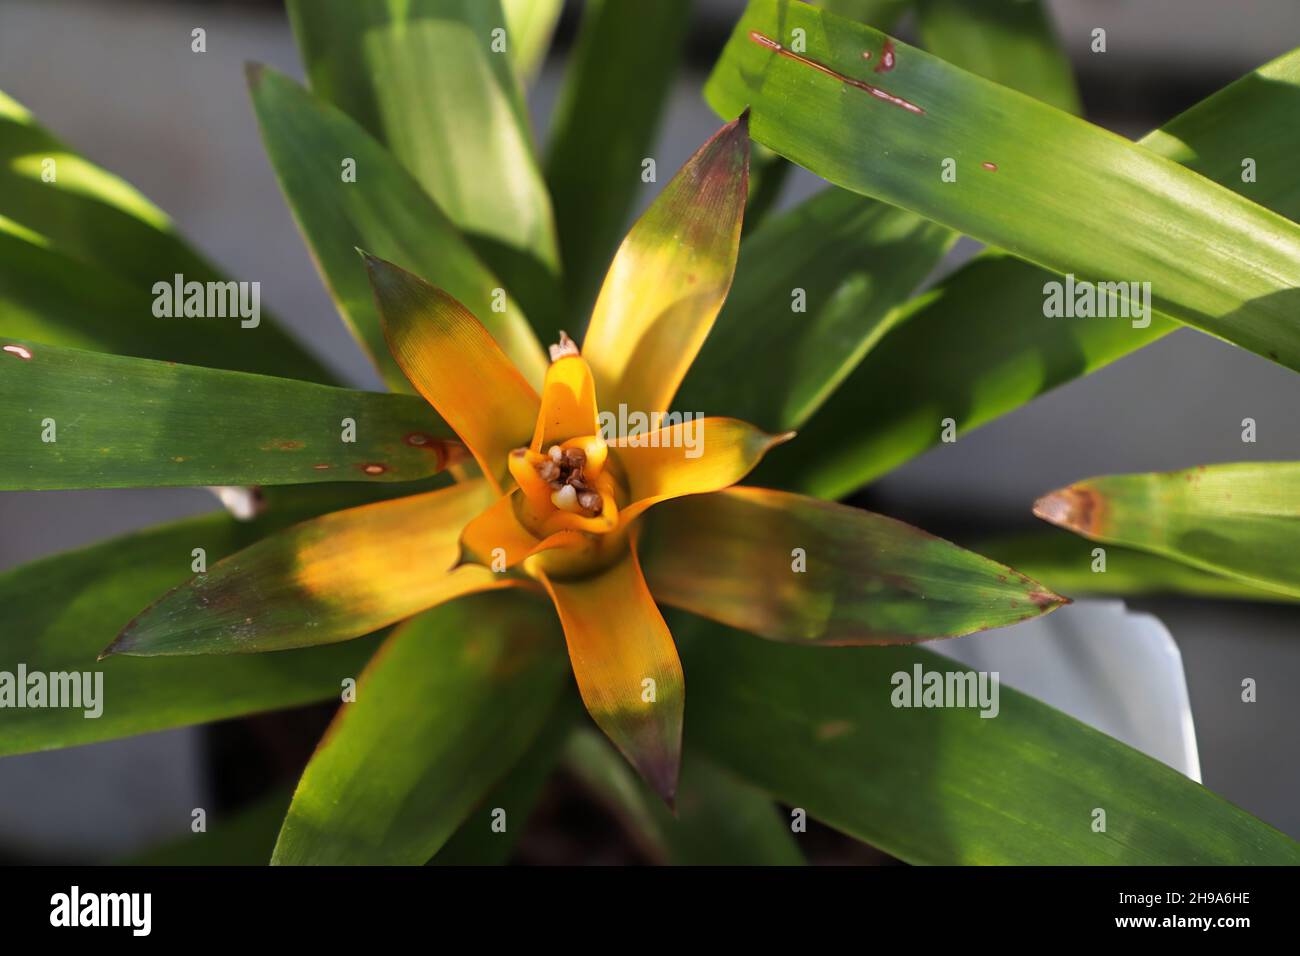 Top view of a yellow orange bromeliad in color Stock Photo